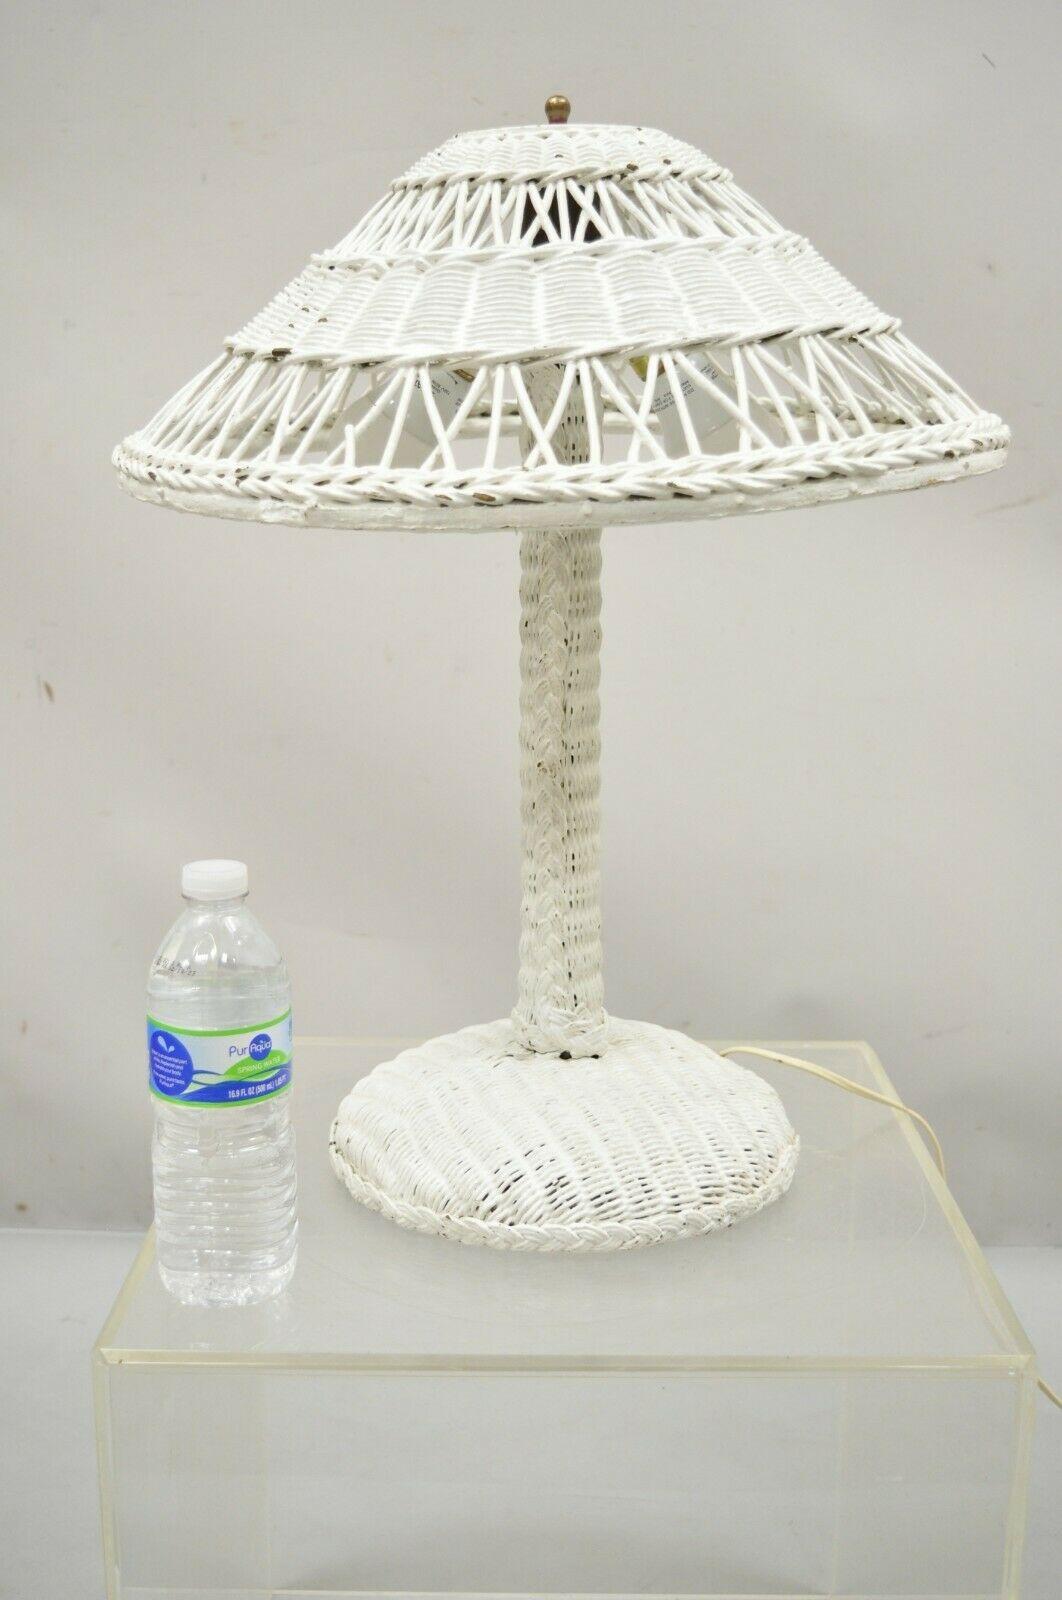 Antique Heywood Wakefield Arts & Crafts White Wicker Table Lamp wth Shade For Sale 4